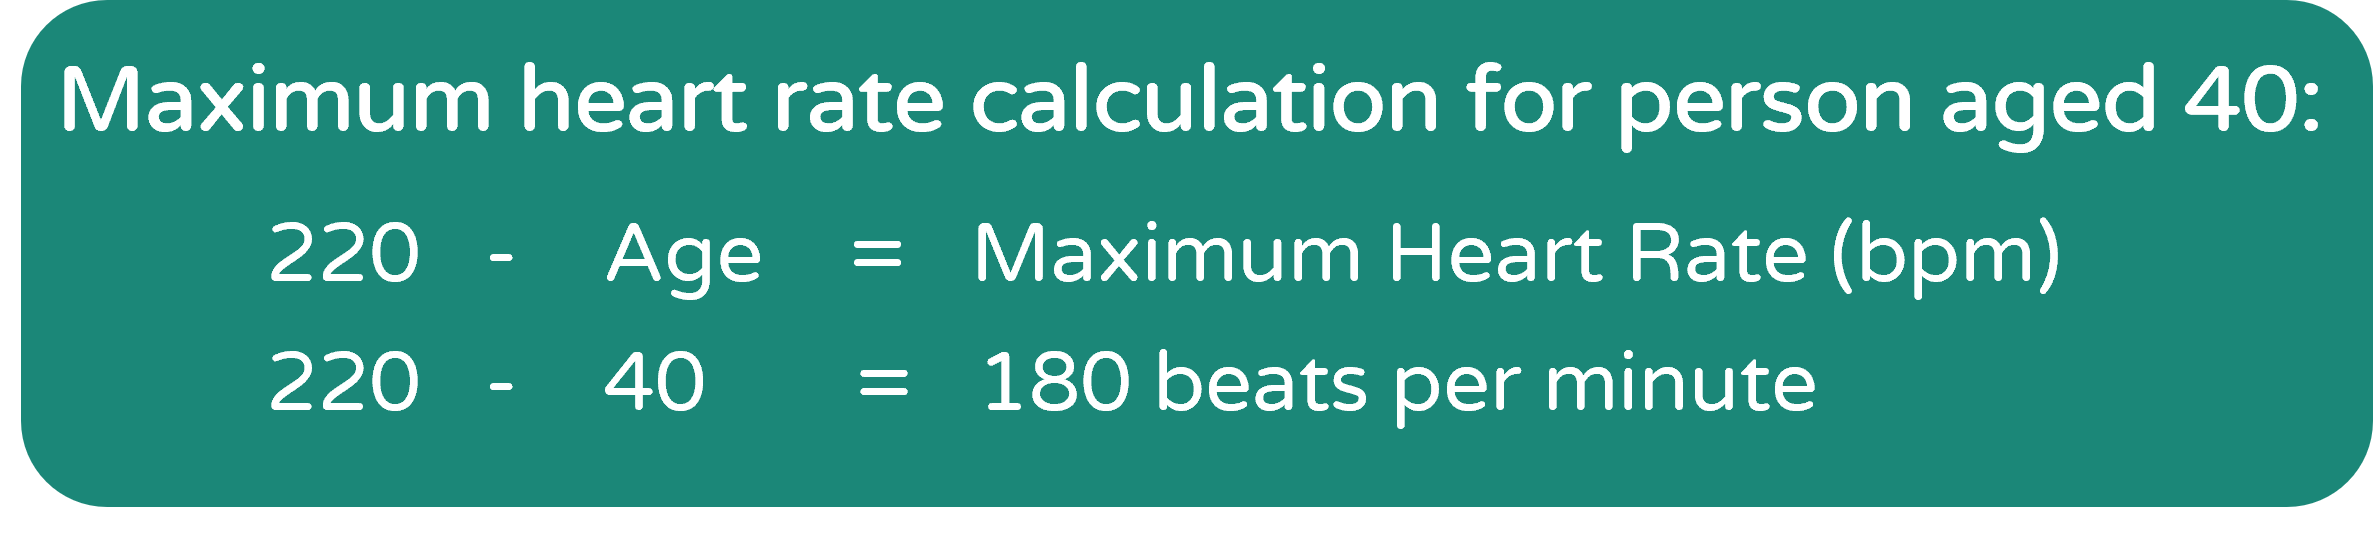 Maximum heart rate calculation for person aged 40:

220 - age = maximum heart rate (bpm)
220 - 40 = 180 beats per minute